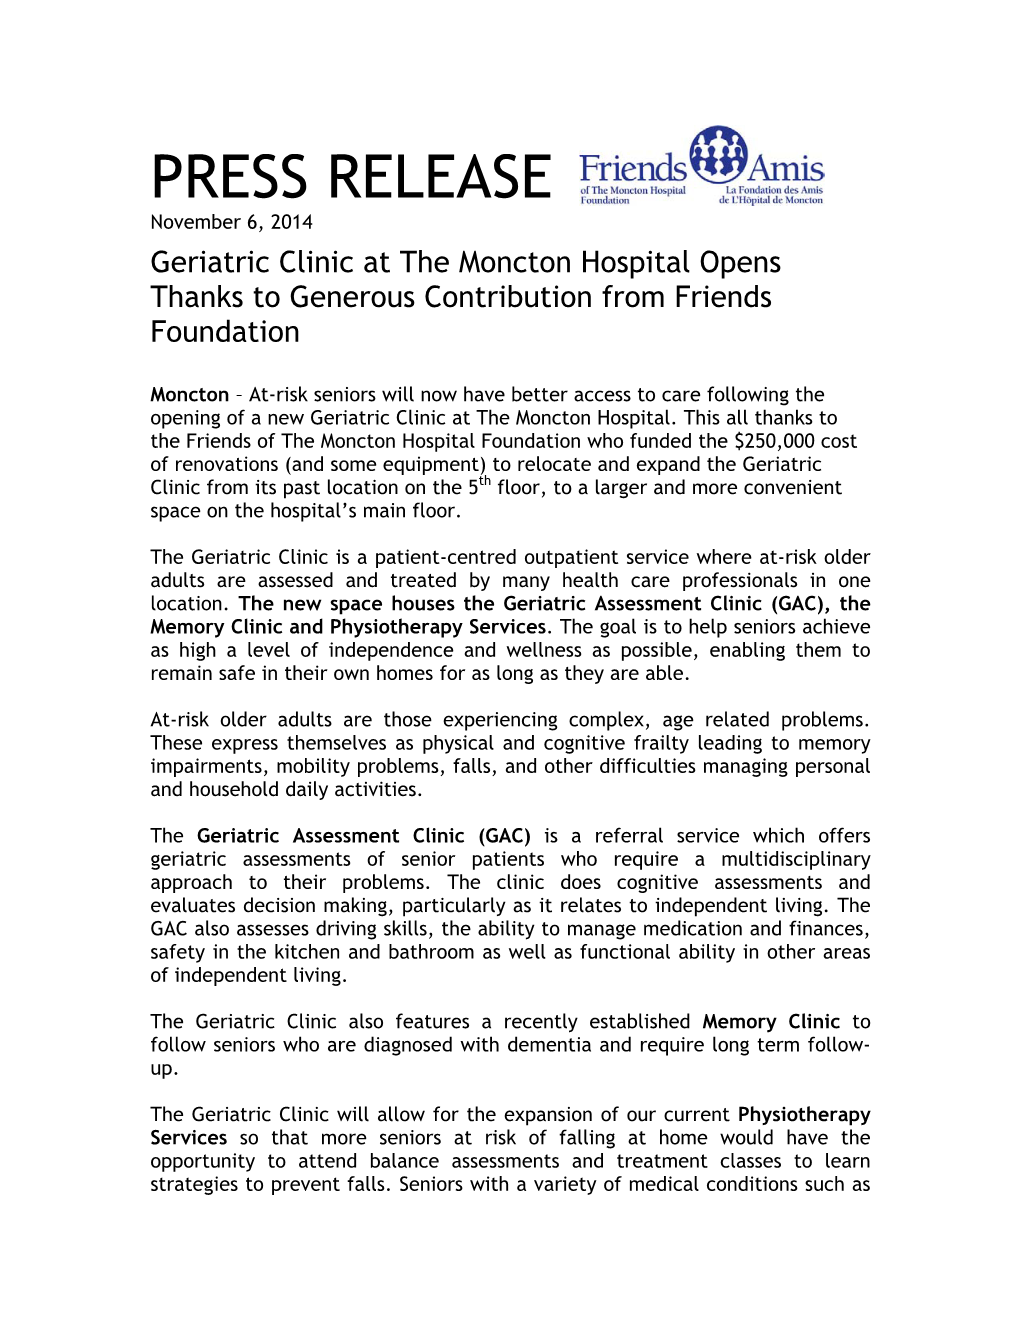 PRESS RELEASE November 6, 2014 Geriatric Clinic at the Moncton Hospital Opens Thanks to Generous Contribution from Friends Foundation